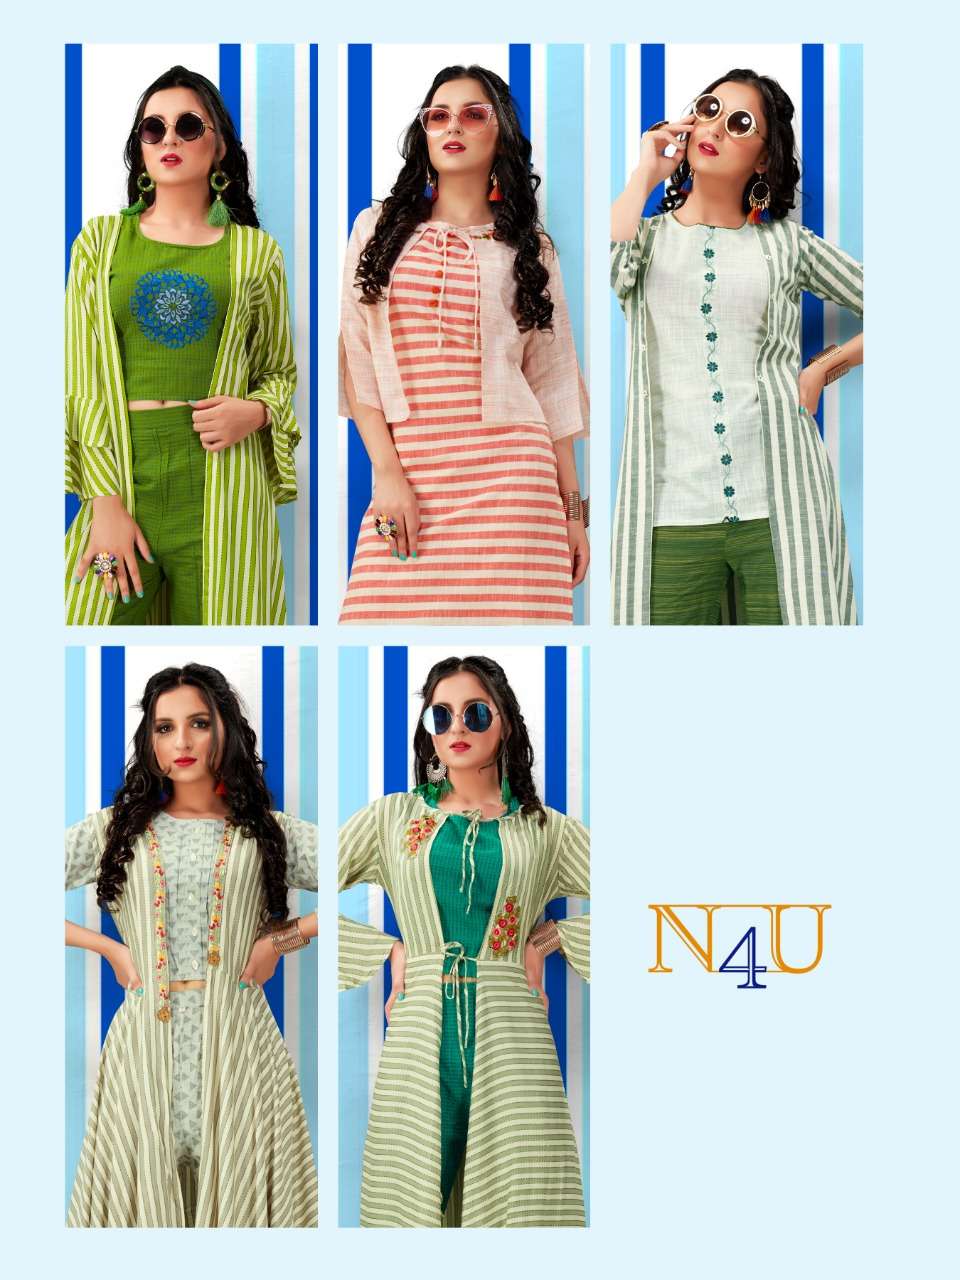 NIHARIKA BY N4U 10001 TO 10005 SERIES STYLISH FANCY BEAUTIFUL COLORFUL CASUAL WEAR & ETHNIC WEAR RAYON/SOUTH COTTON KURTIS WITH BOTTOM AT WHOLESALE PRICE